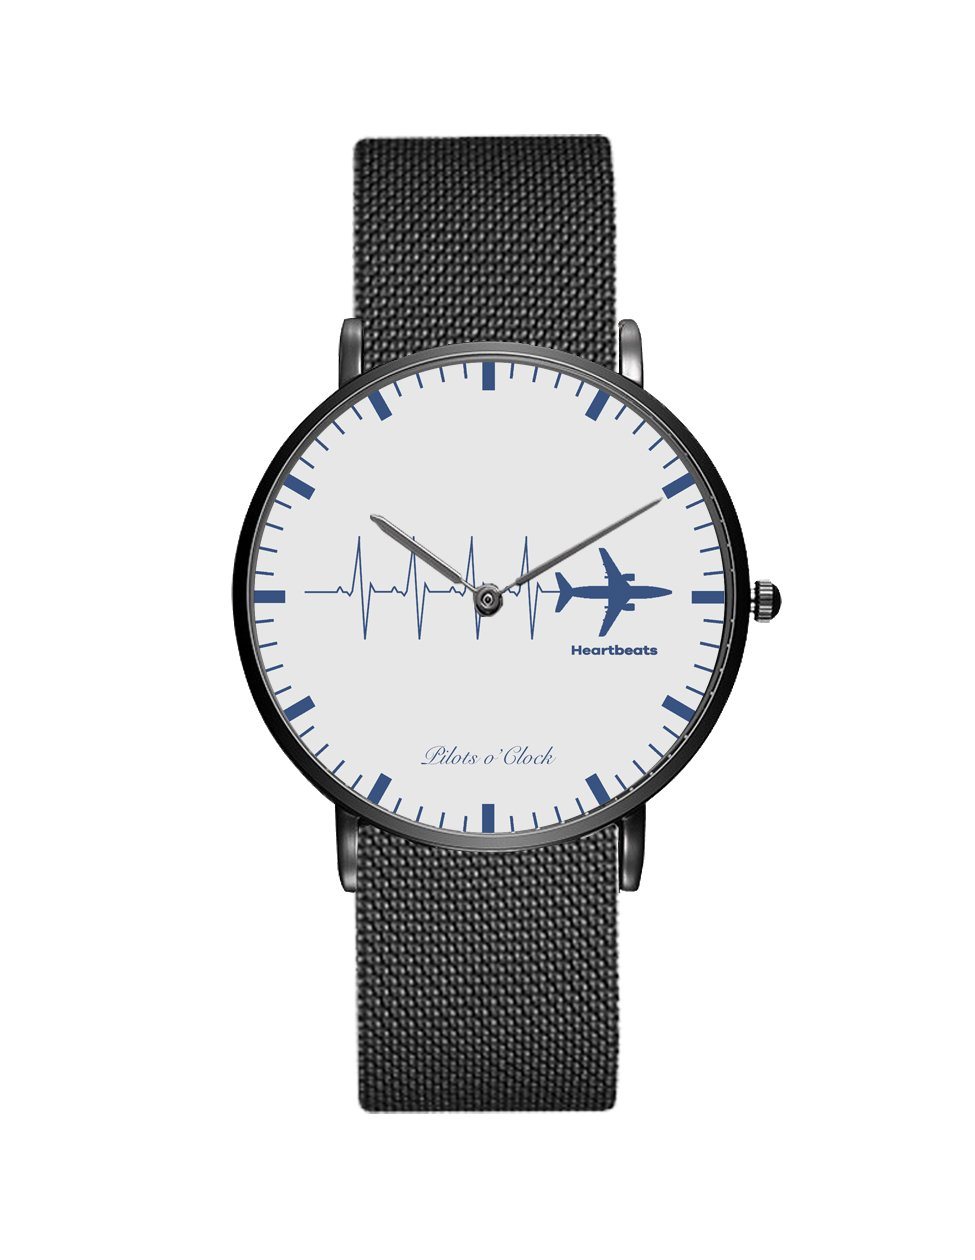 Aviation Heartbeats Stainless Steel Strap Watches Pilot Eyes Store Black & Stainless Steel Strap 